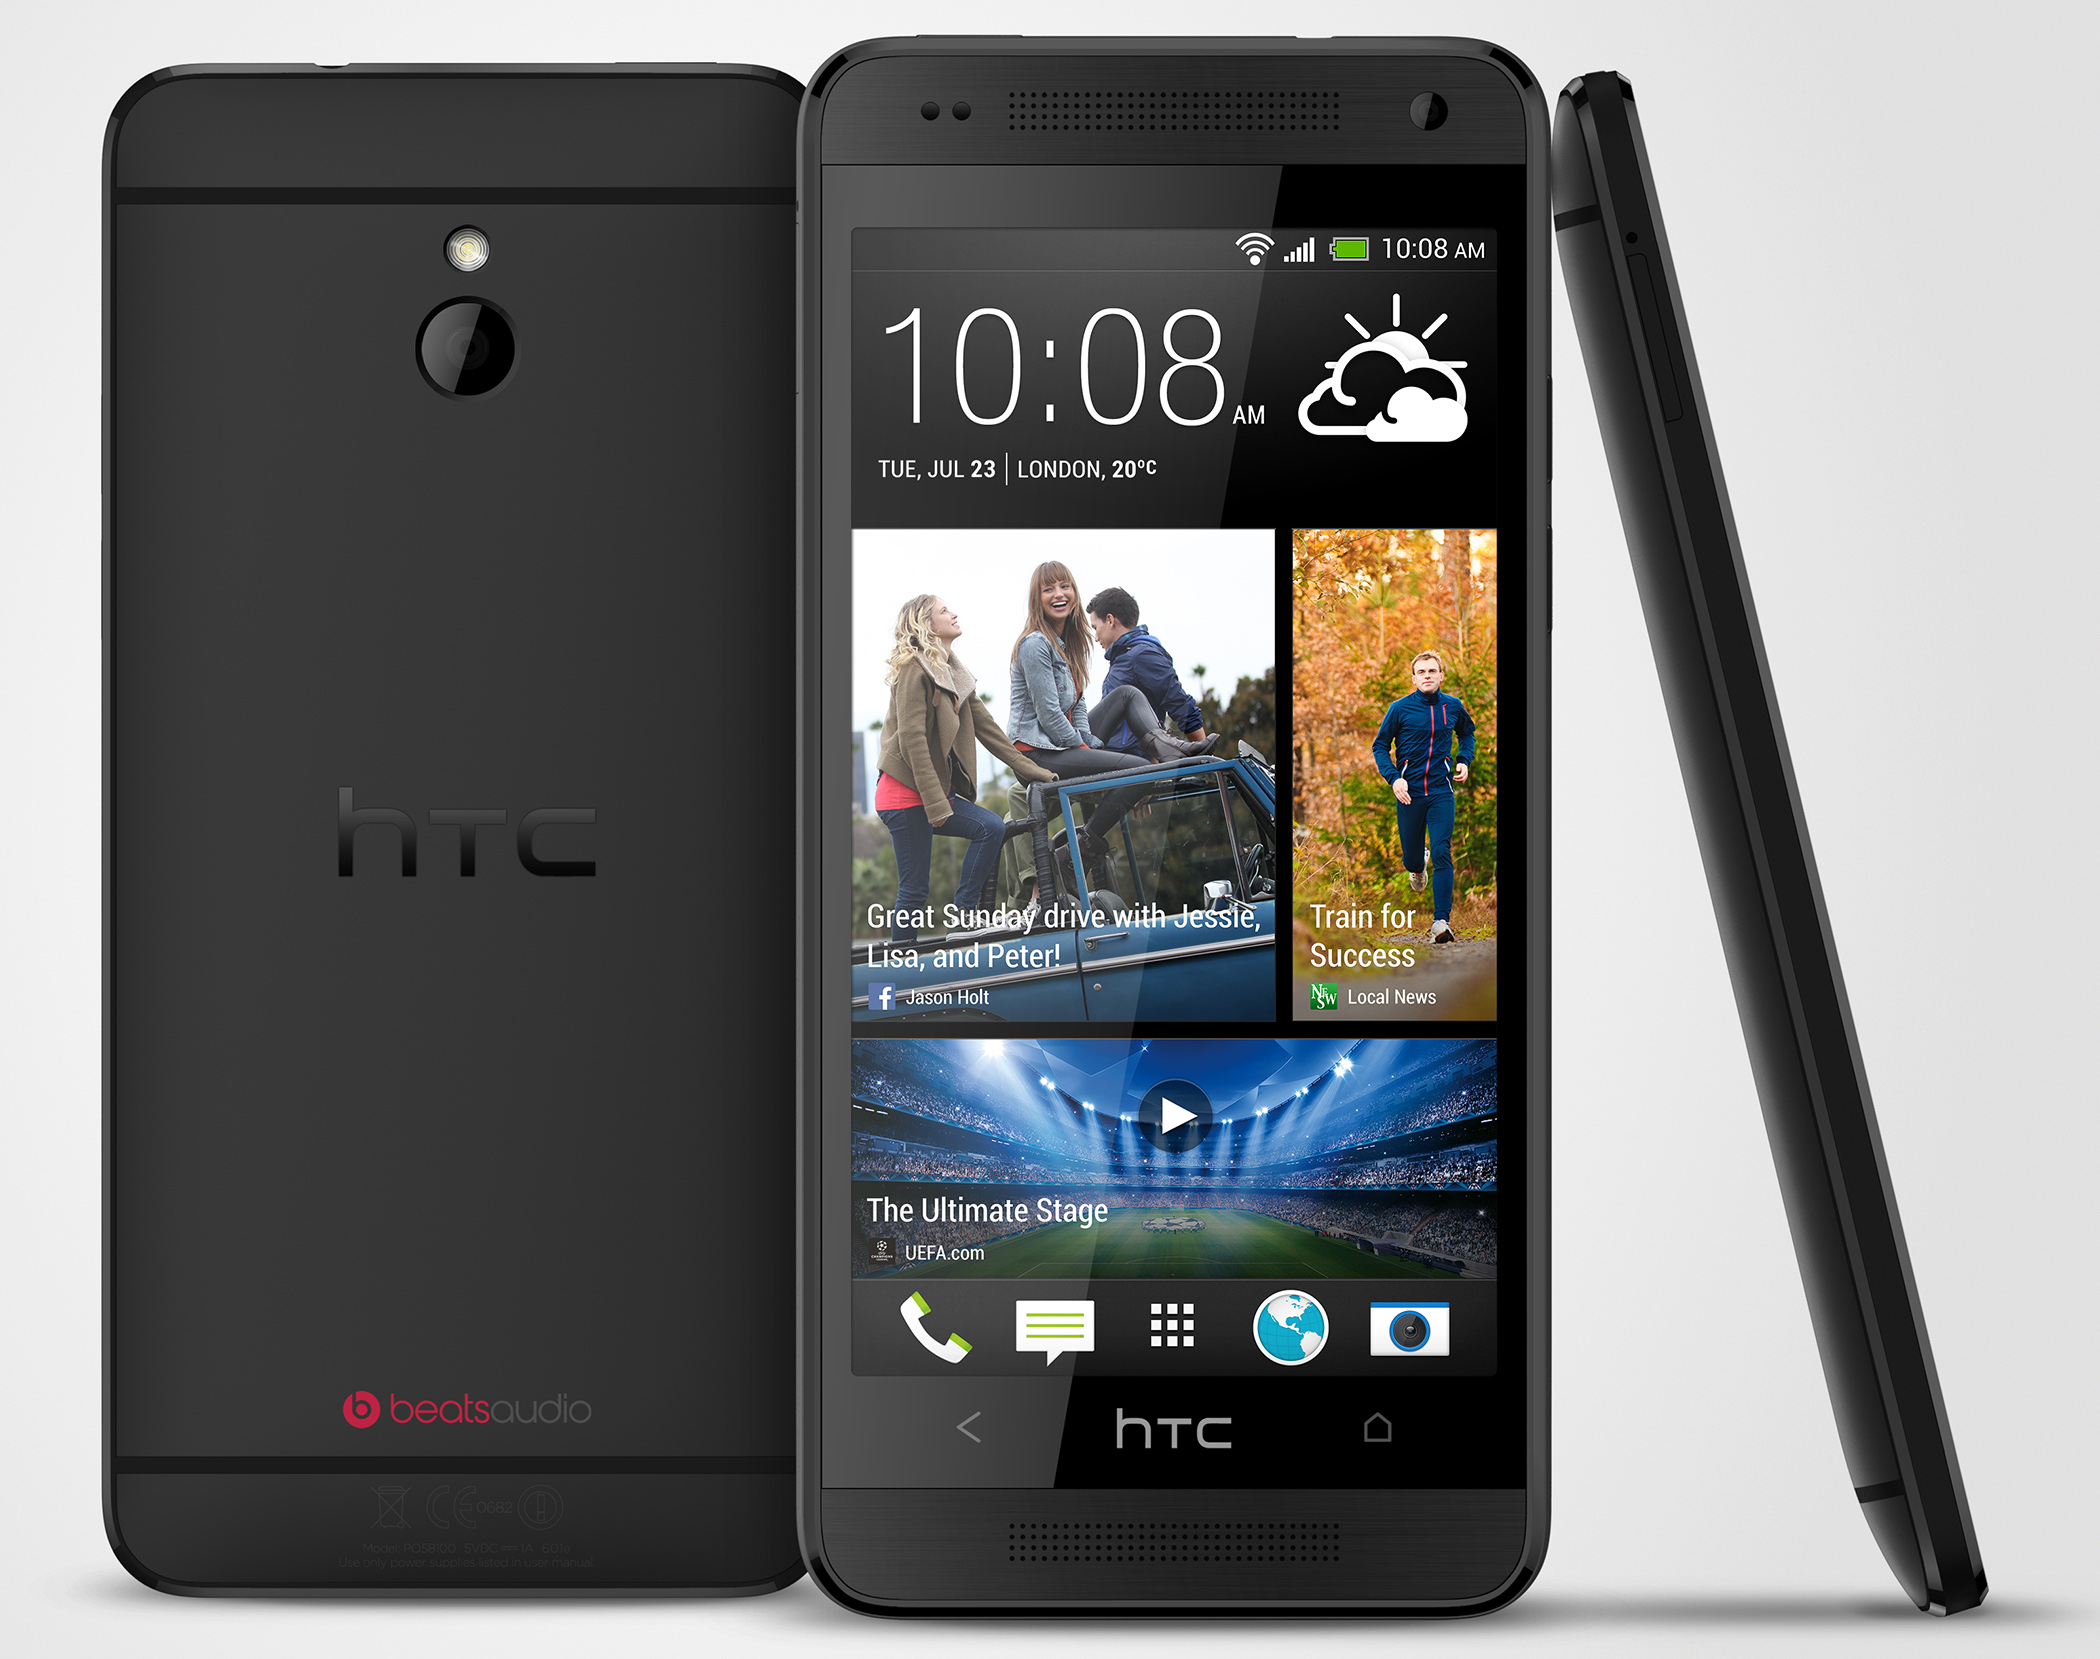 HTC One Mini with metal chassis, BoomSound, and Zoes coming soon